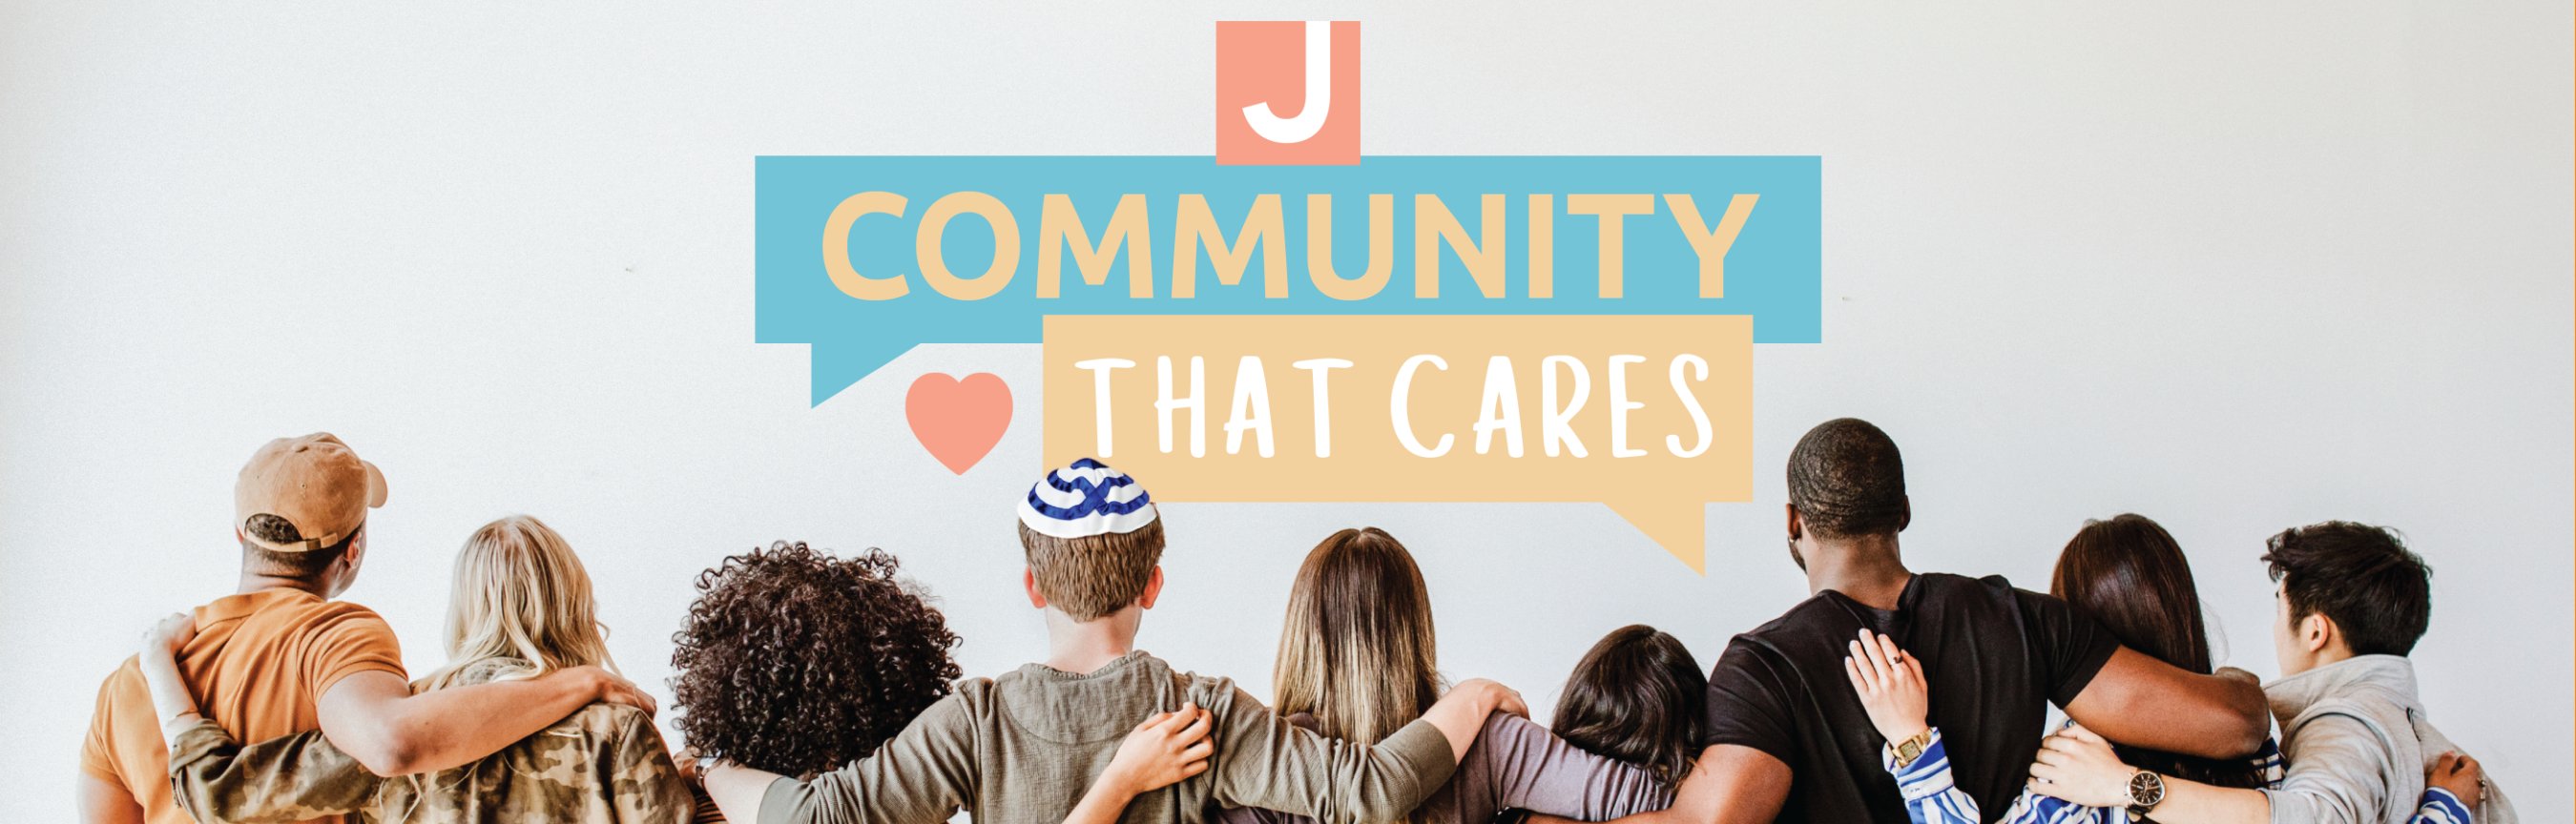 Join a Community that Cares